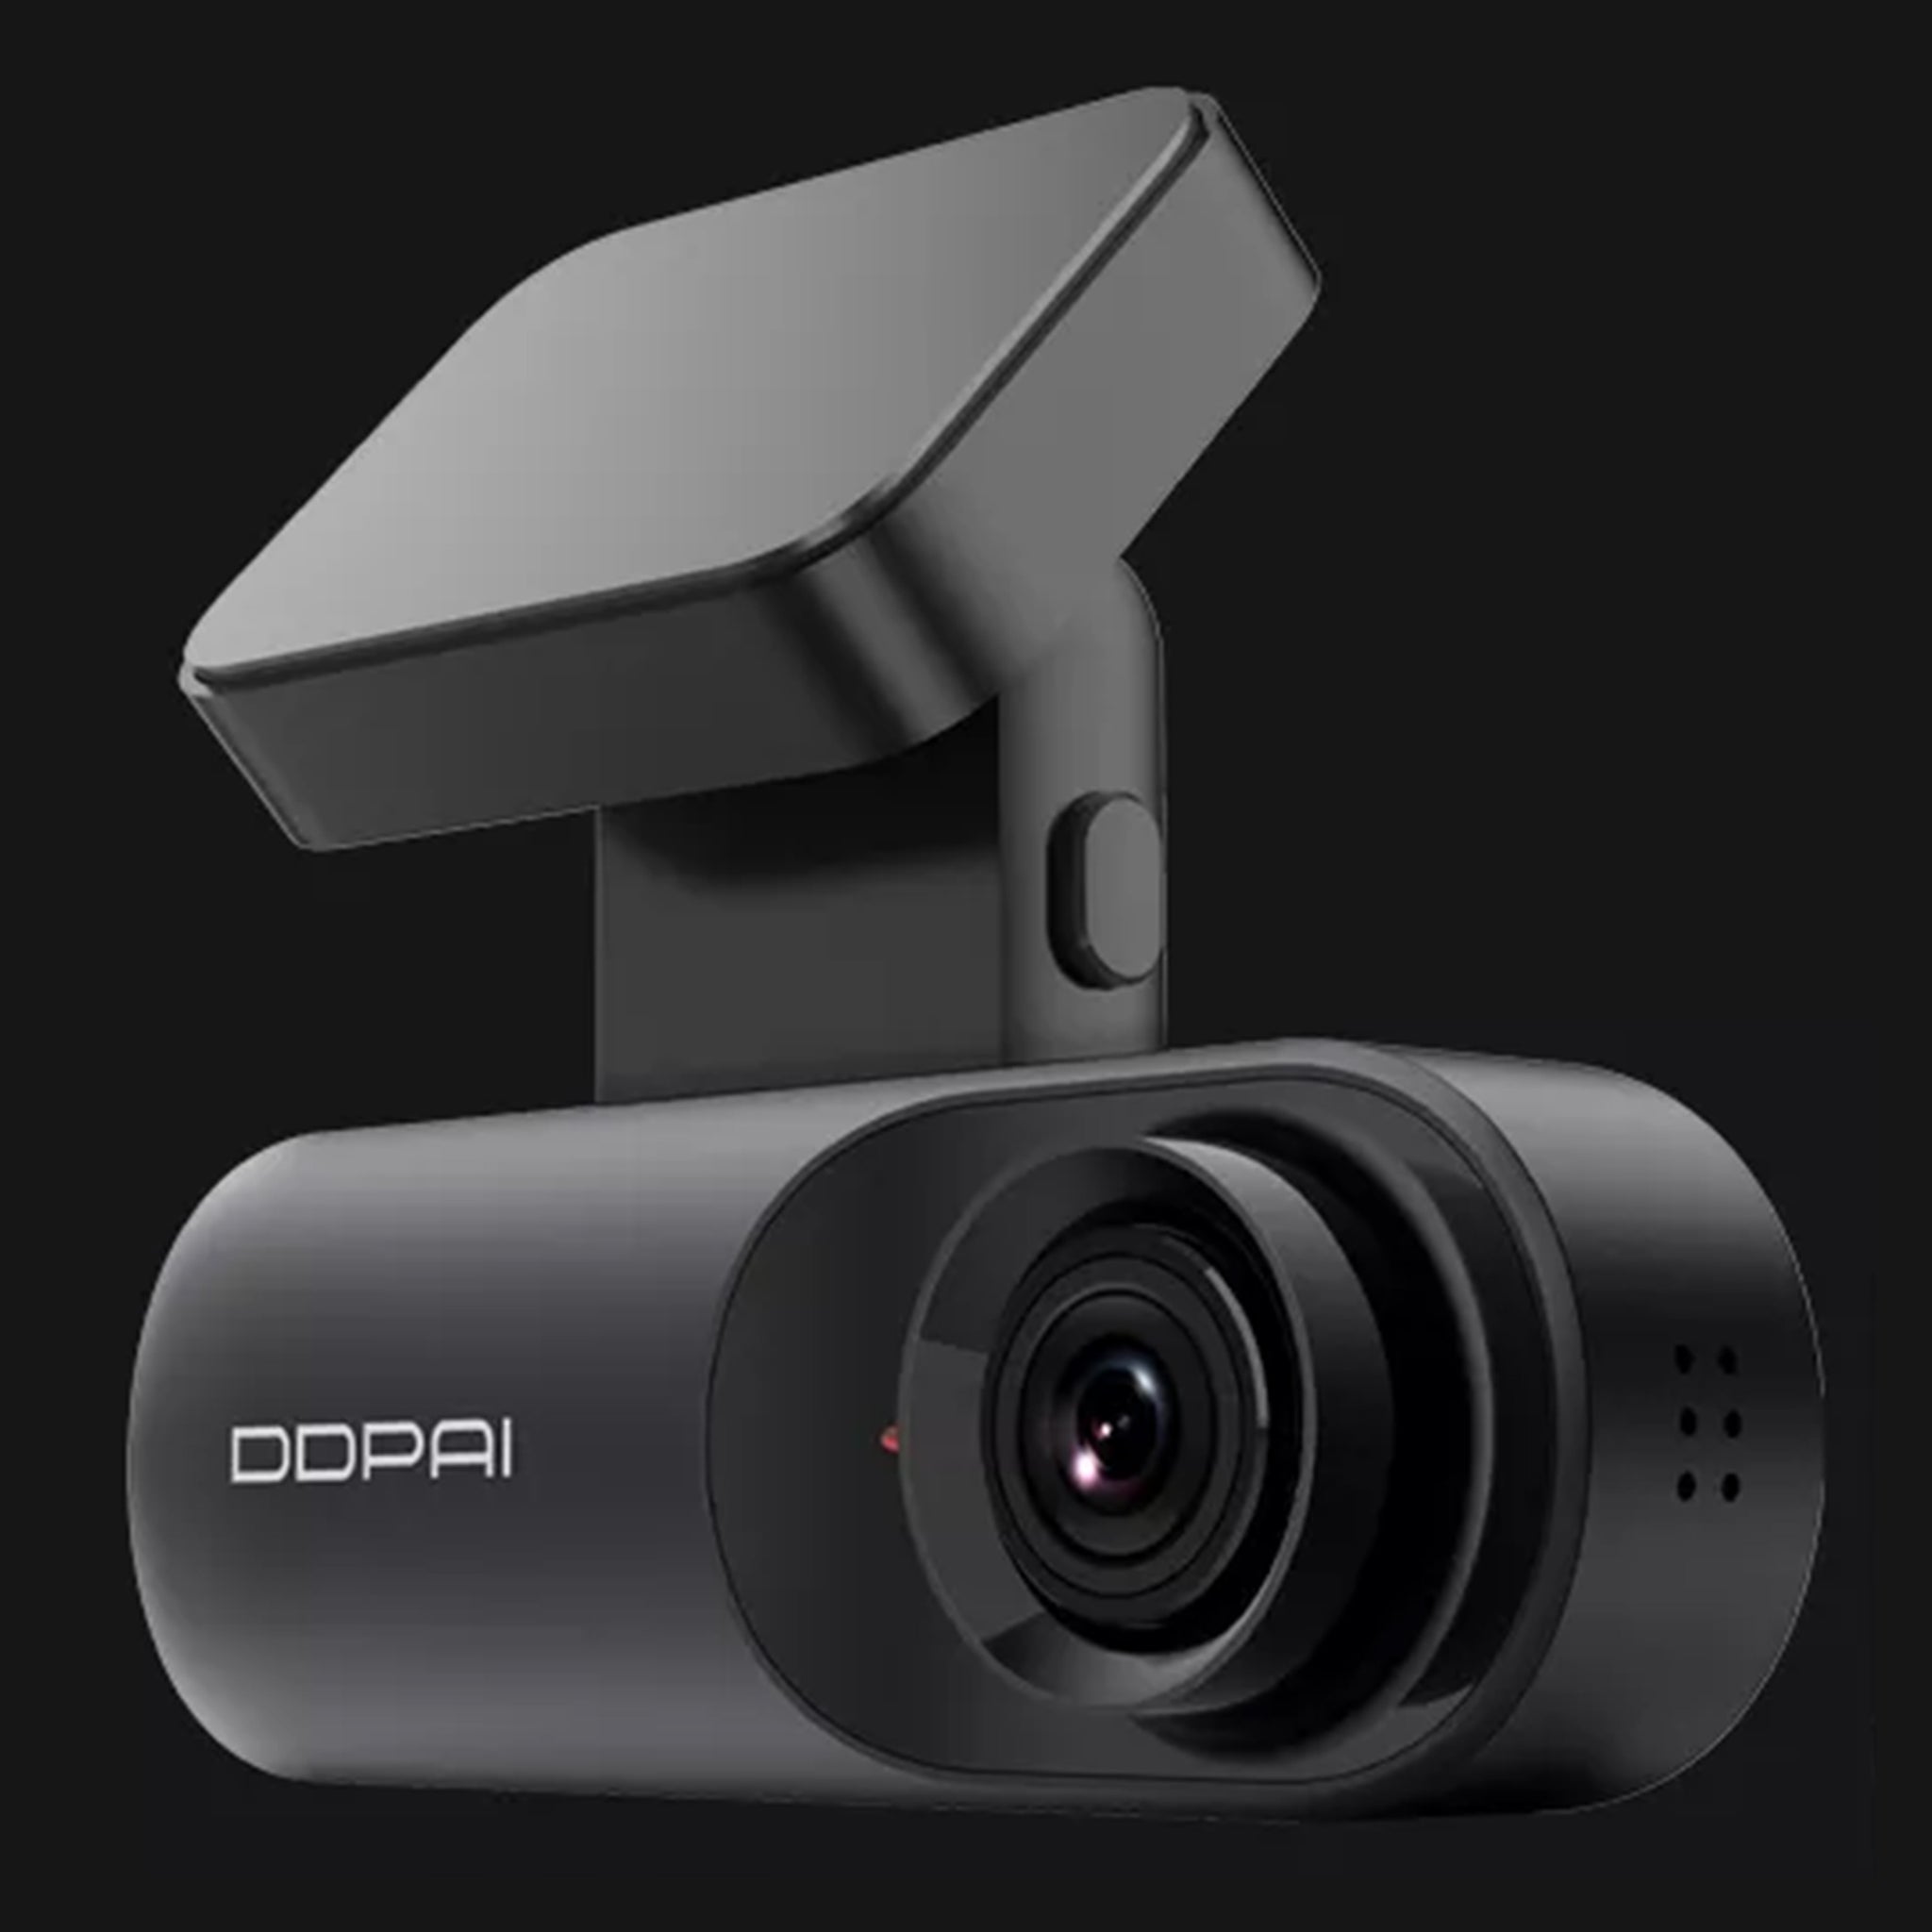 Update DDPAI Dash Cam Mola N3 1600P HD Vehicle Drive Auto Video DVR 2K  Smart Connect Android Wifi Car Camera Recorder 24H Parking Dashcam Dvr 323  From Xselectronics, $53.81